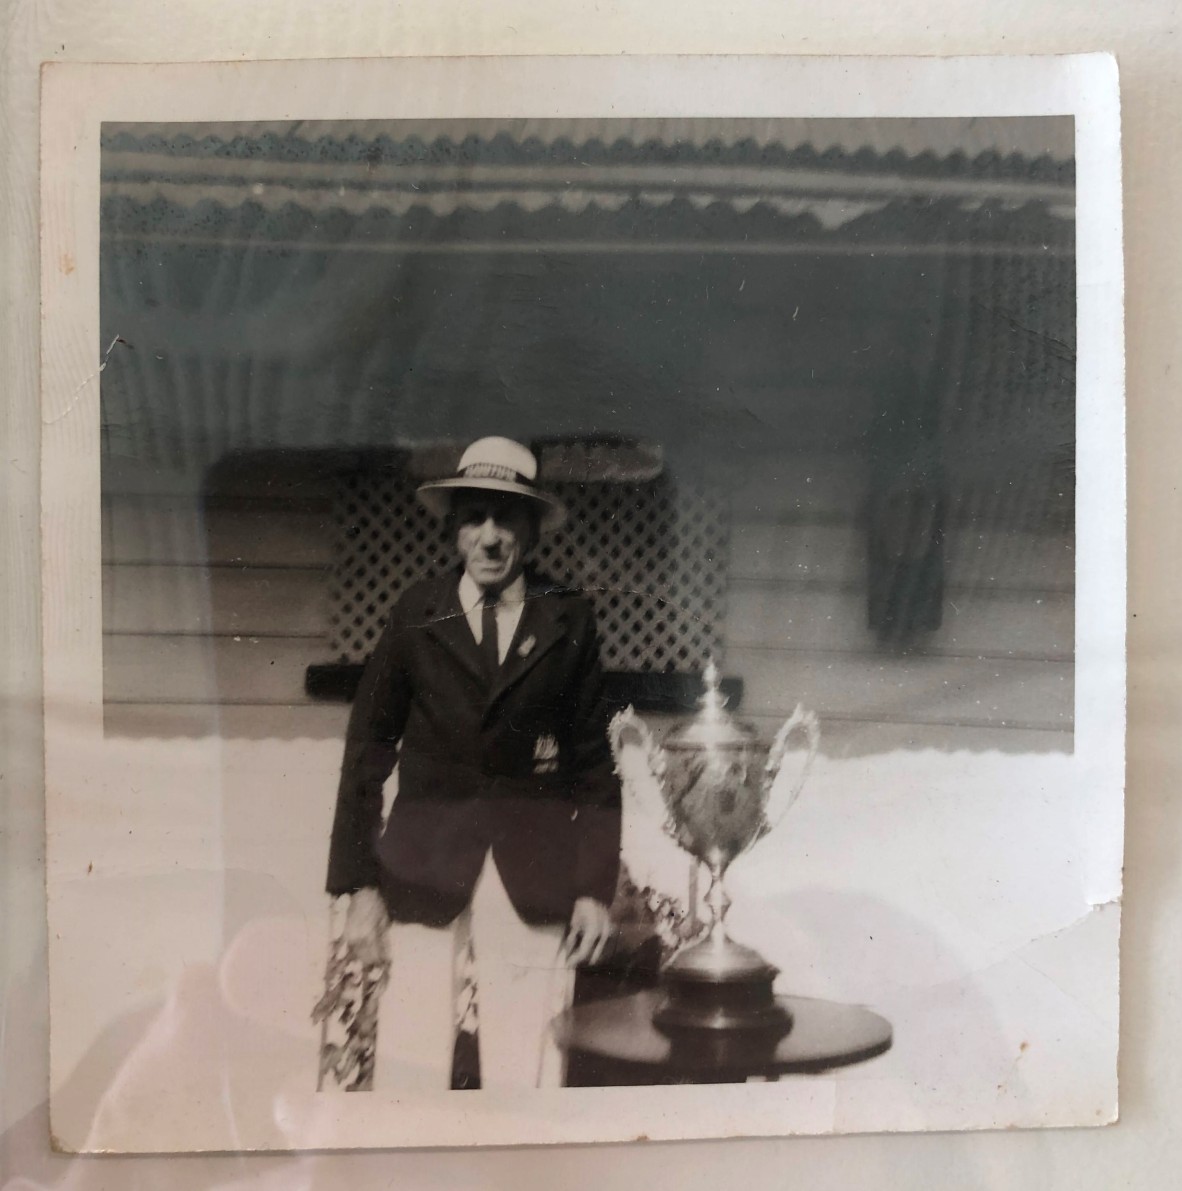 Photo of William (Billy) Baden Unwin with his trophy later in life. Ca 1960s.